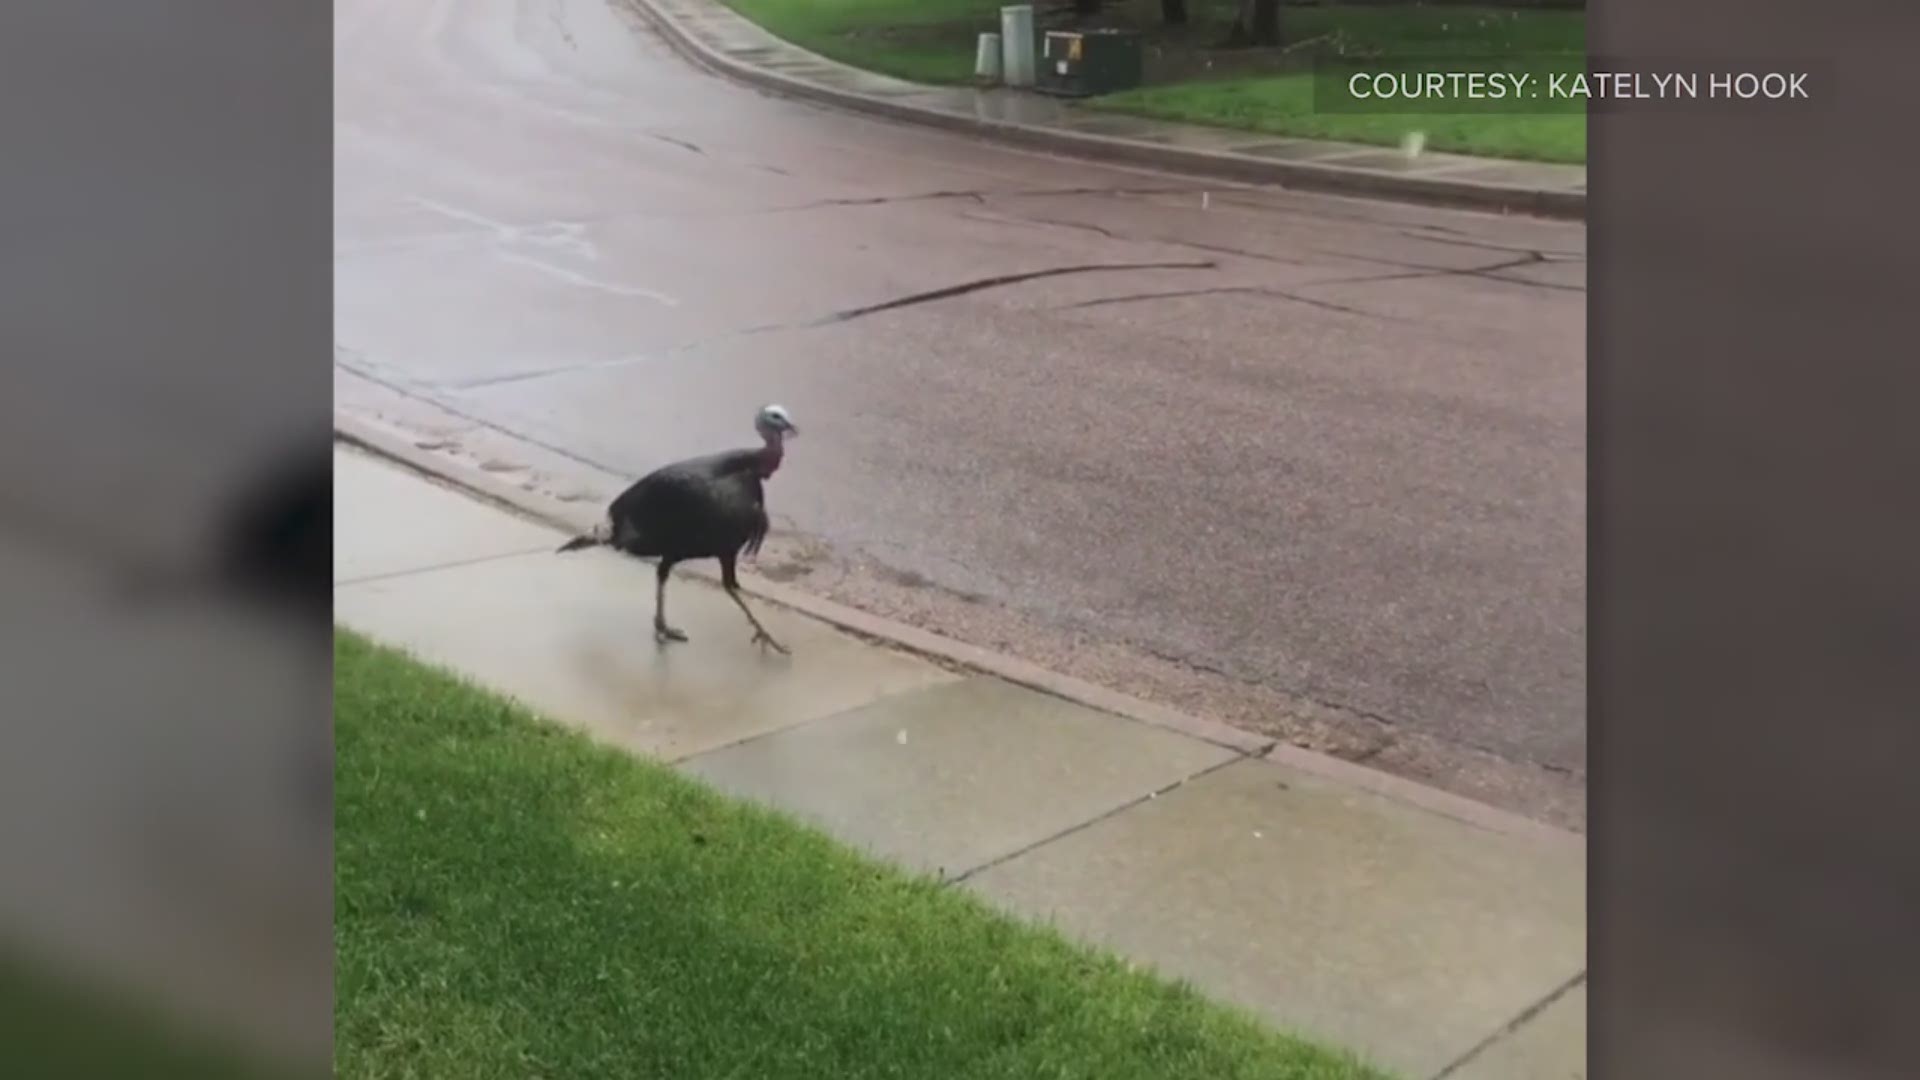 The mail carrier says the turkey got in front of her truck and wouldn't move. So she honked, and that really seemed to tick off the turkey. After harassing her for a while, the Turkey eventually got bored and went on its way.